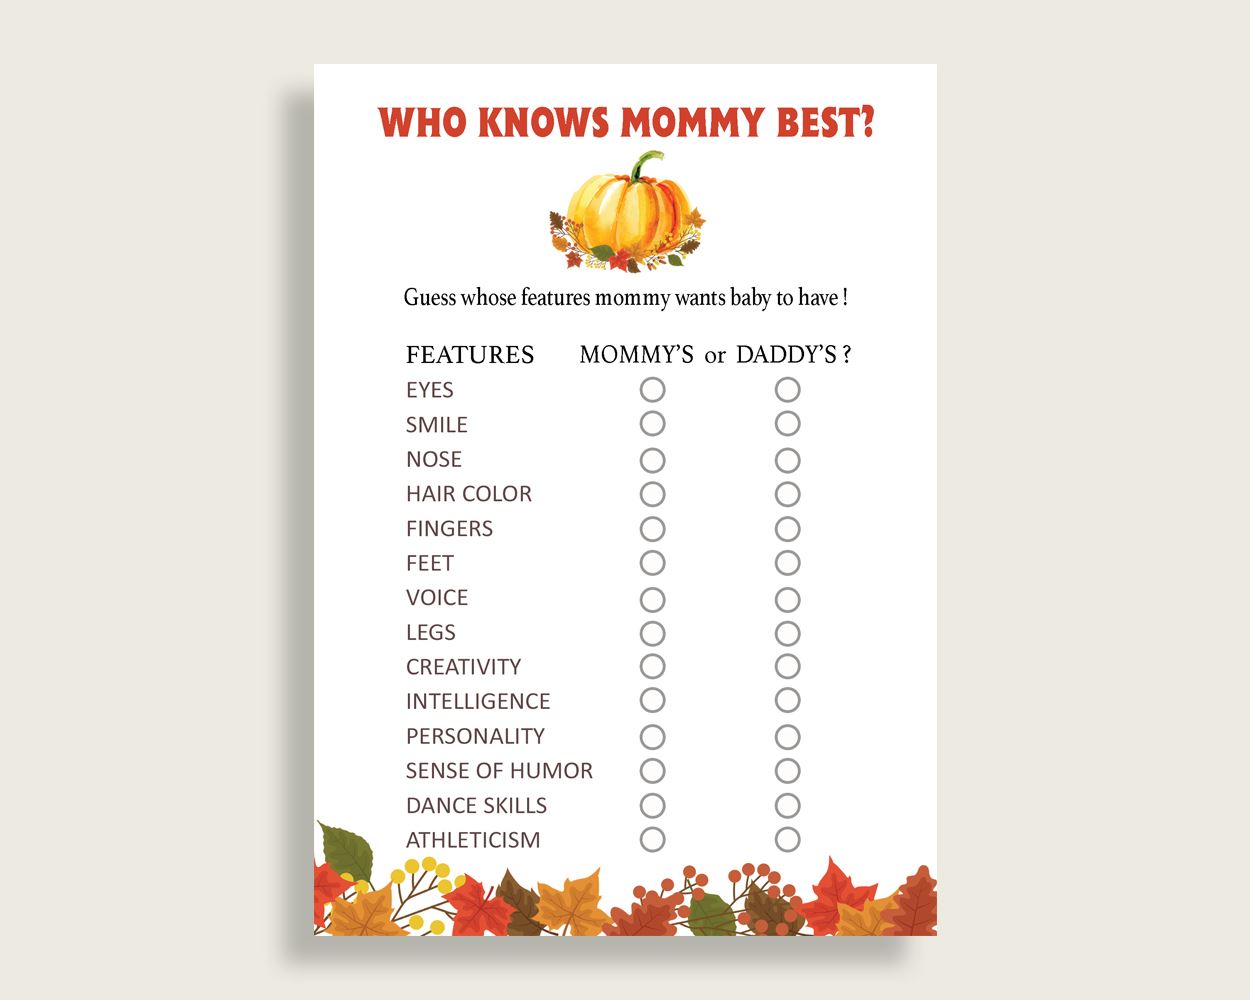 Who Knows Mommy Best Baby Shower Who Knows Mommy Best Fall Baby Shower Who Knows Mommy Best Baby Shower Pumpkin Who Knows Mommy Best BPK3D - Digital Product